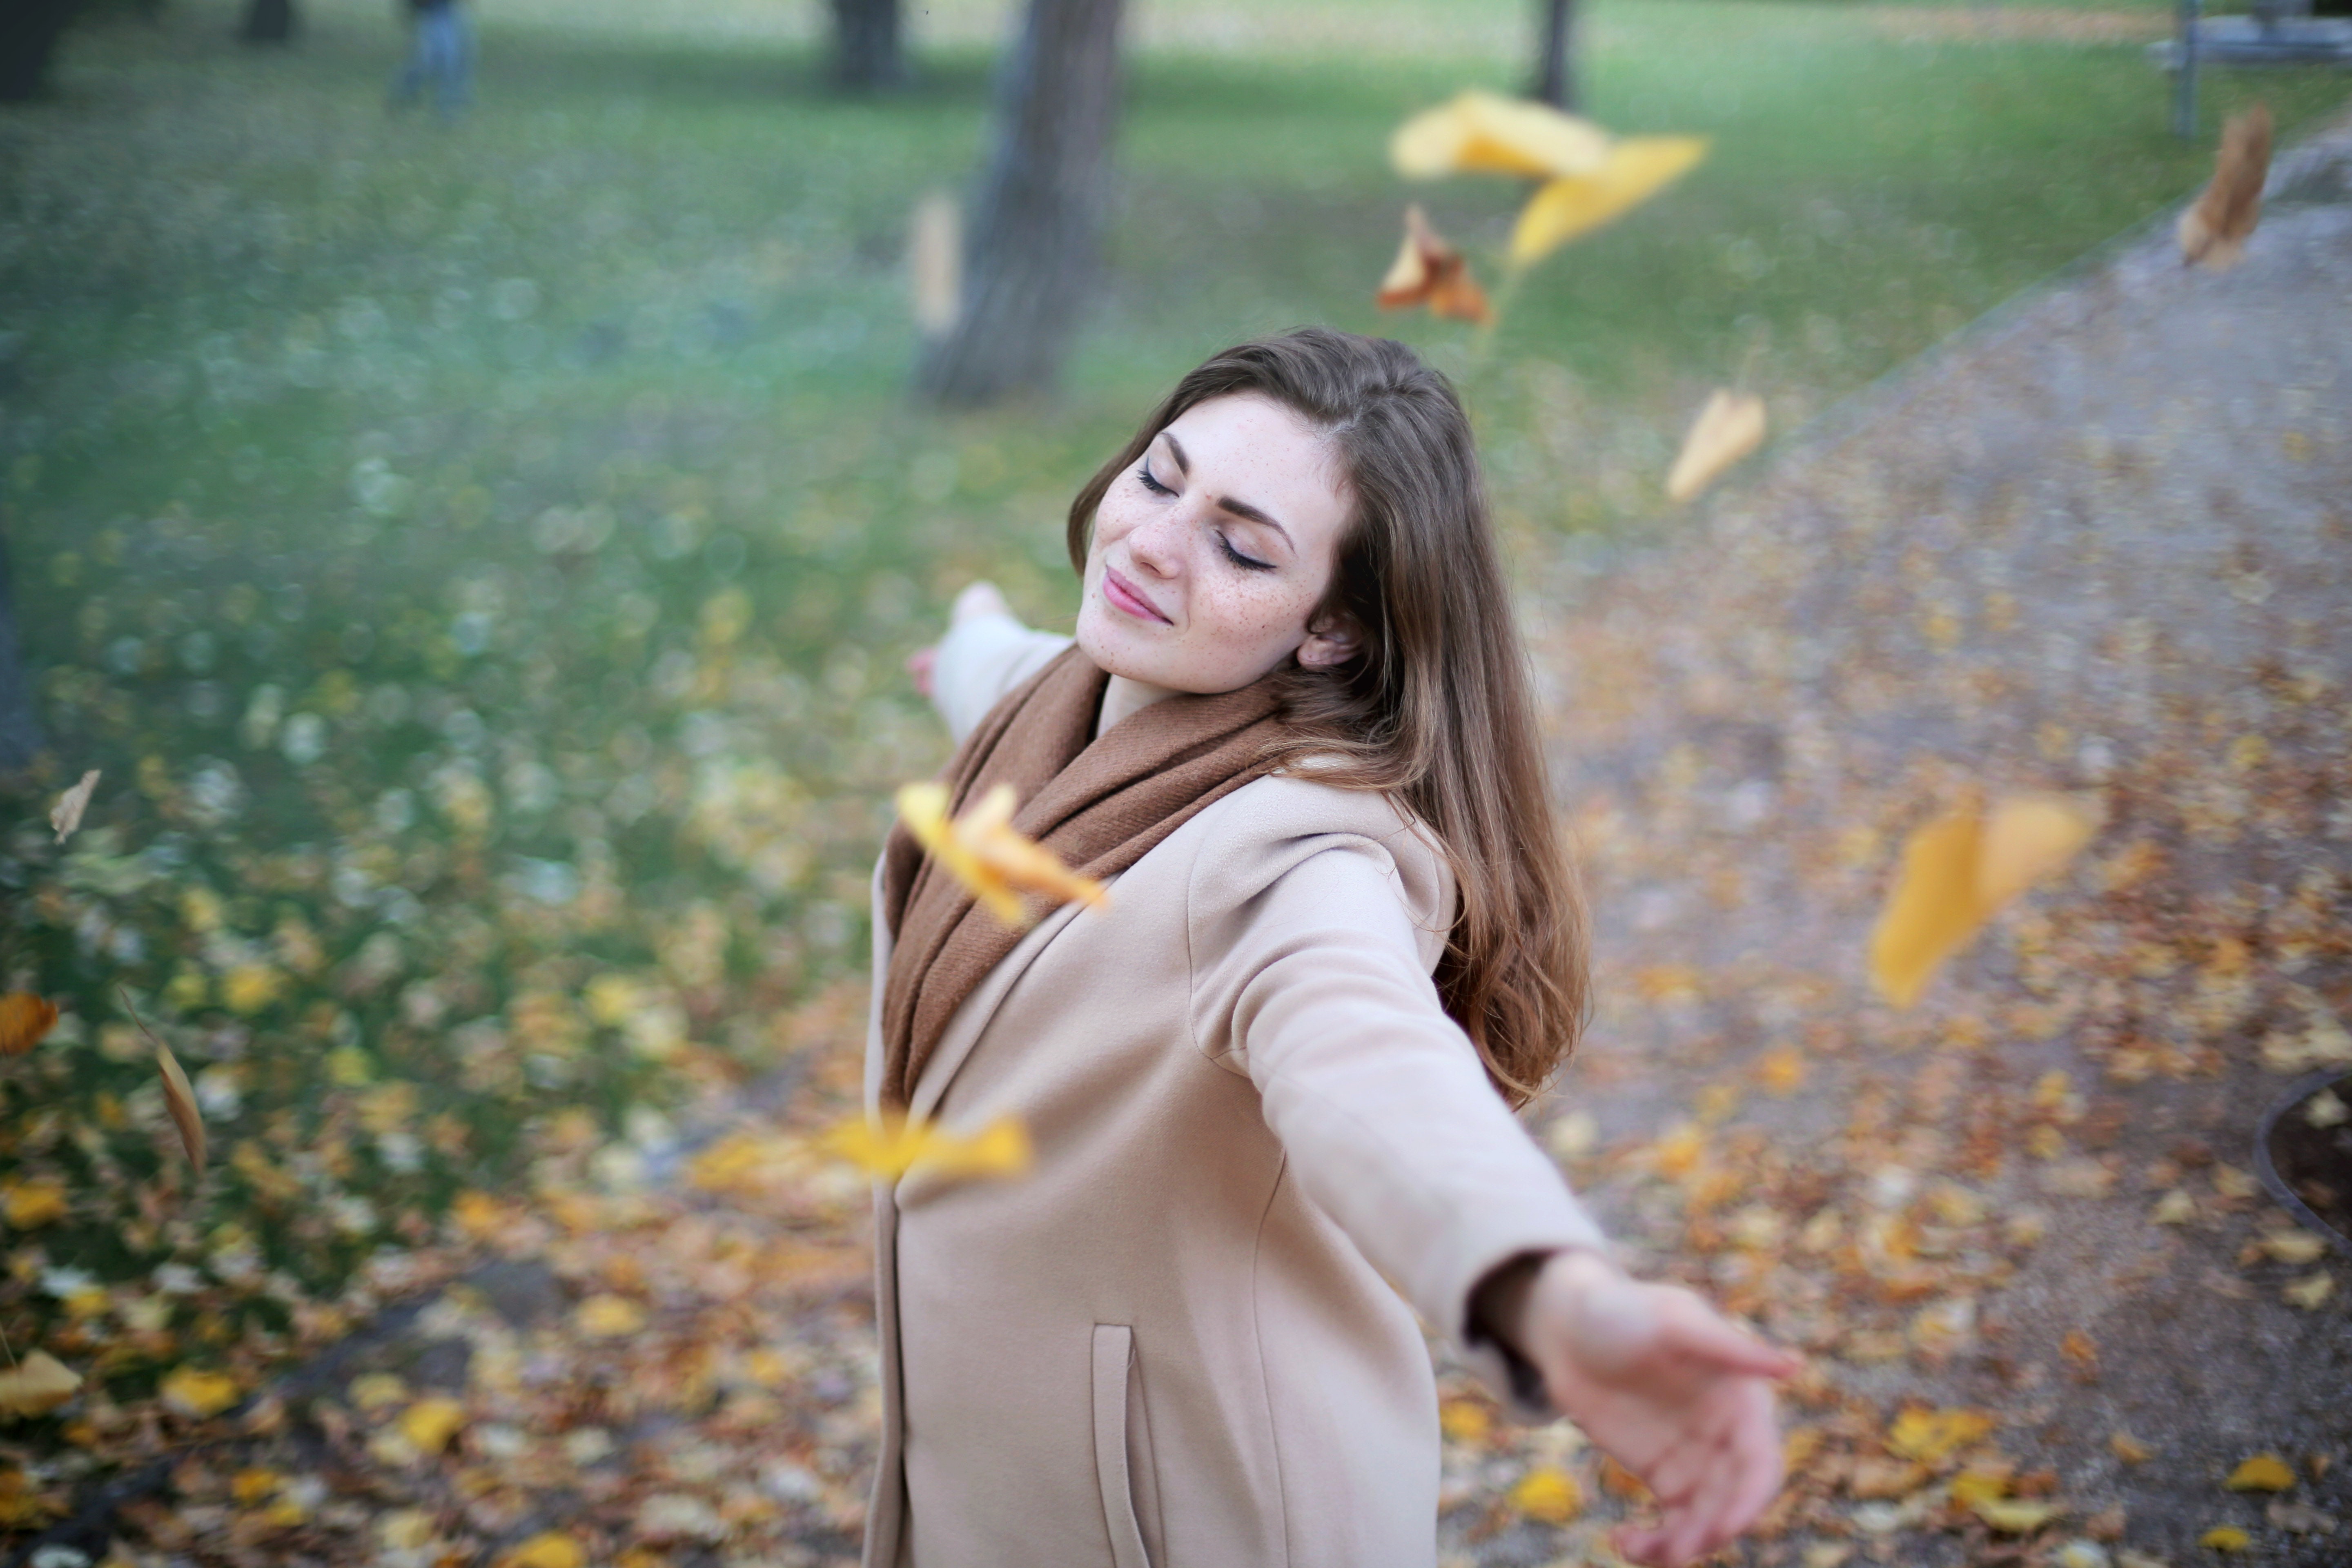 Woman Open Arms While Closed-eyes Smiling Photo, Adult, Photoshoot, Leaves, Leisure, HQ Photo